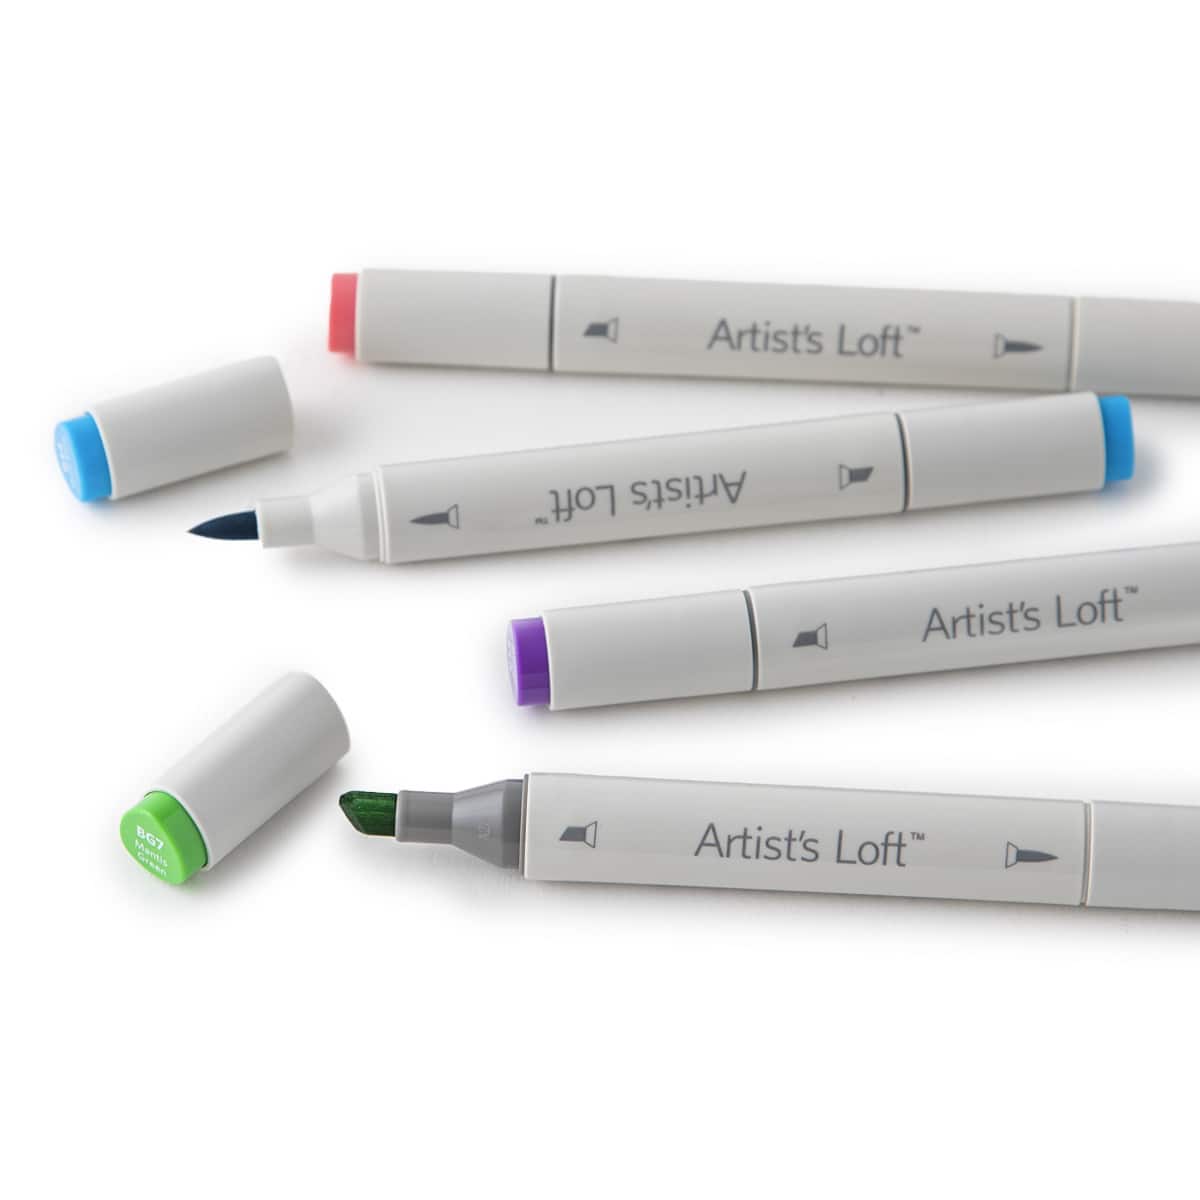 Artist Loft Markers Review: Our Experience with This Art Supply